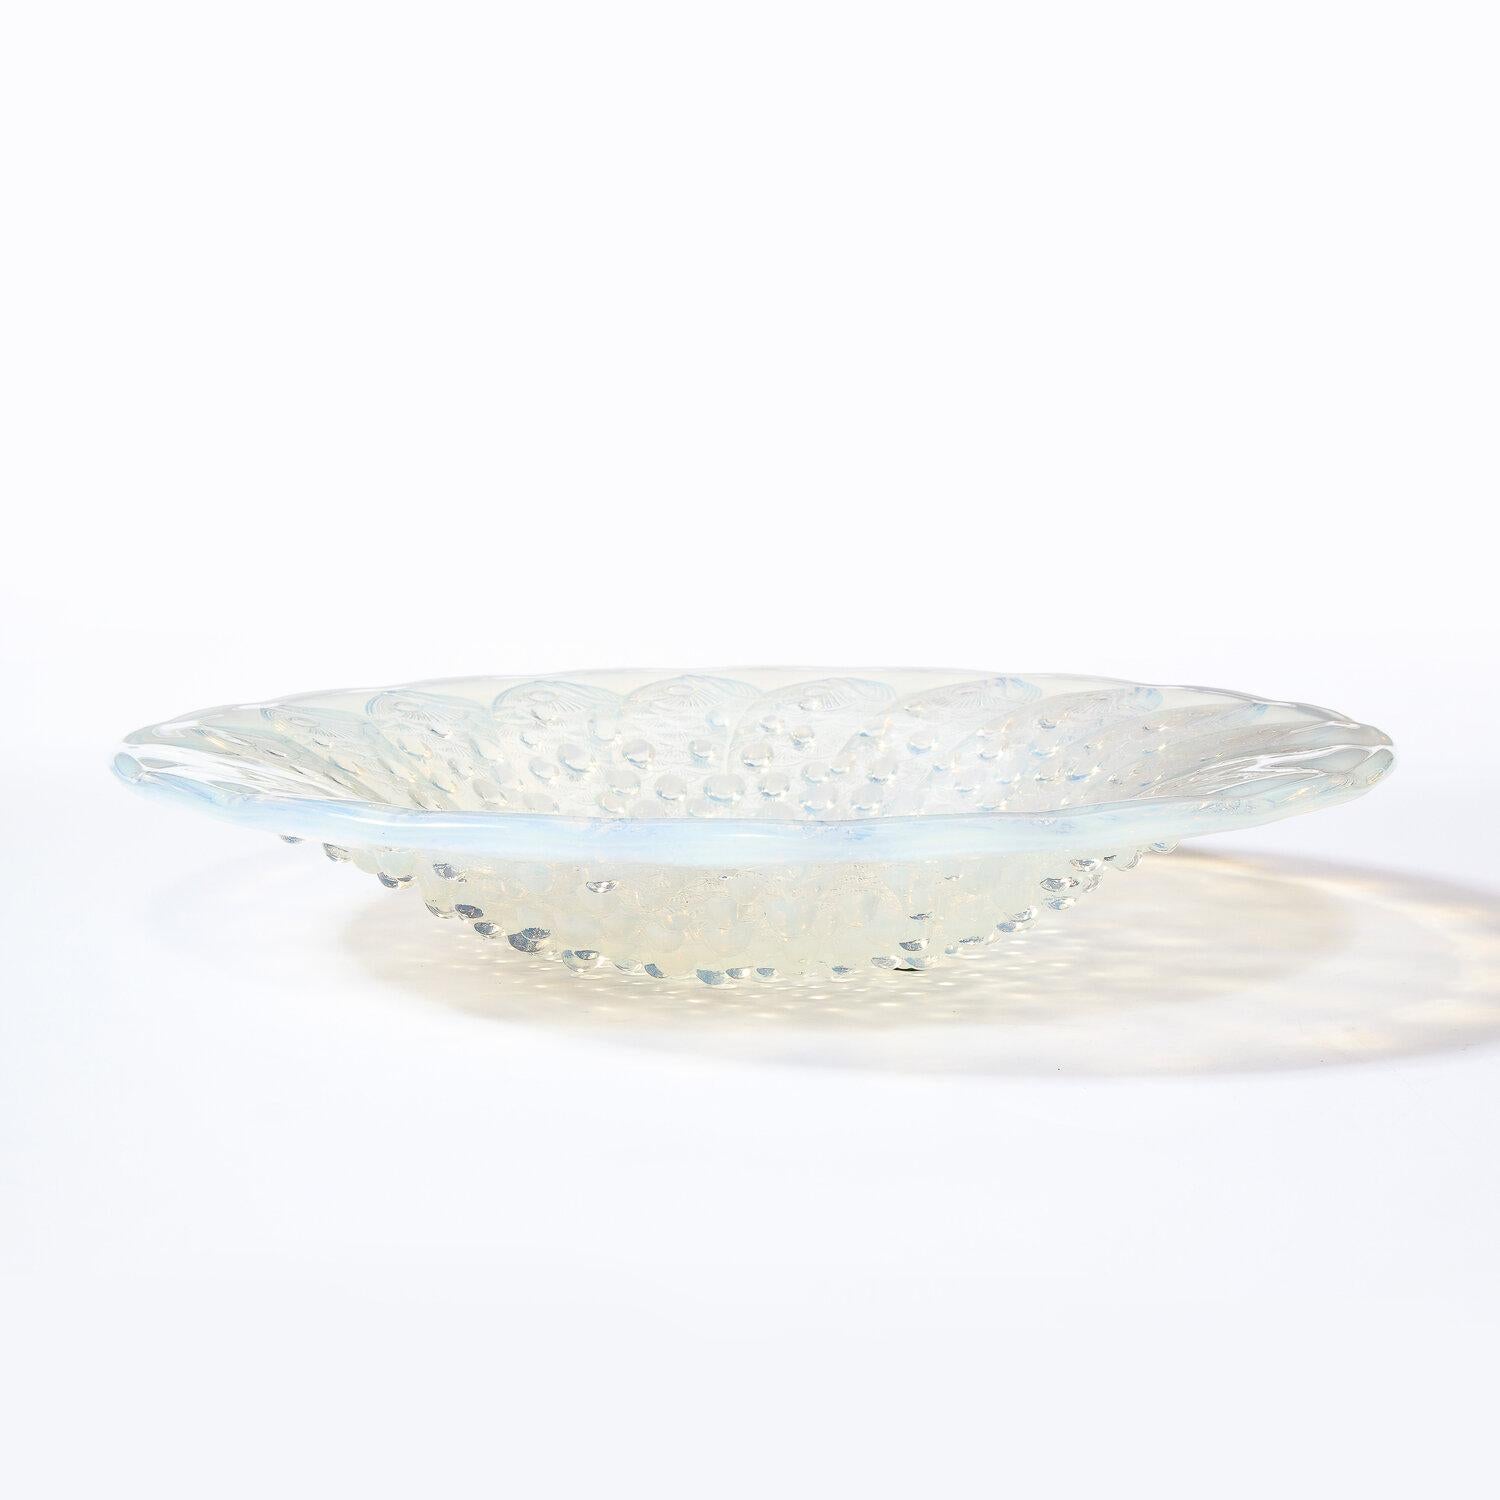 Art Deco Opalescent Glass Center Bowl with Repeating Fish Motif by Lalique For Sale 4